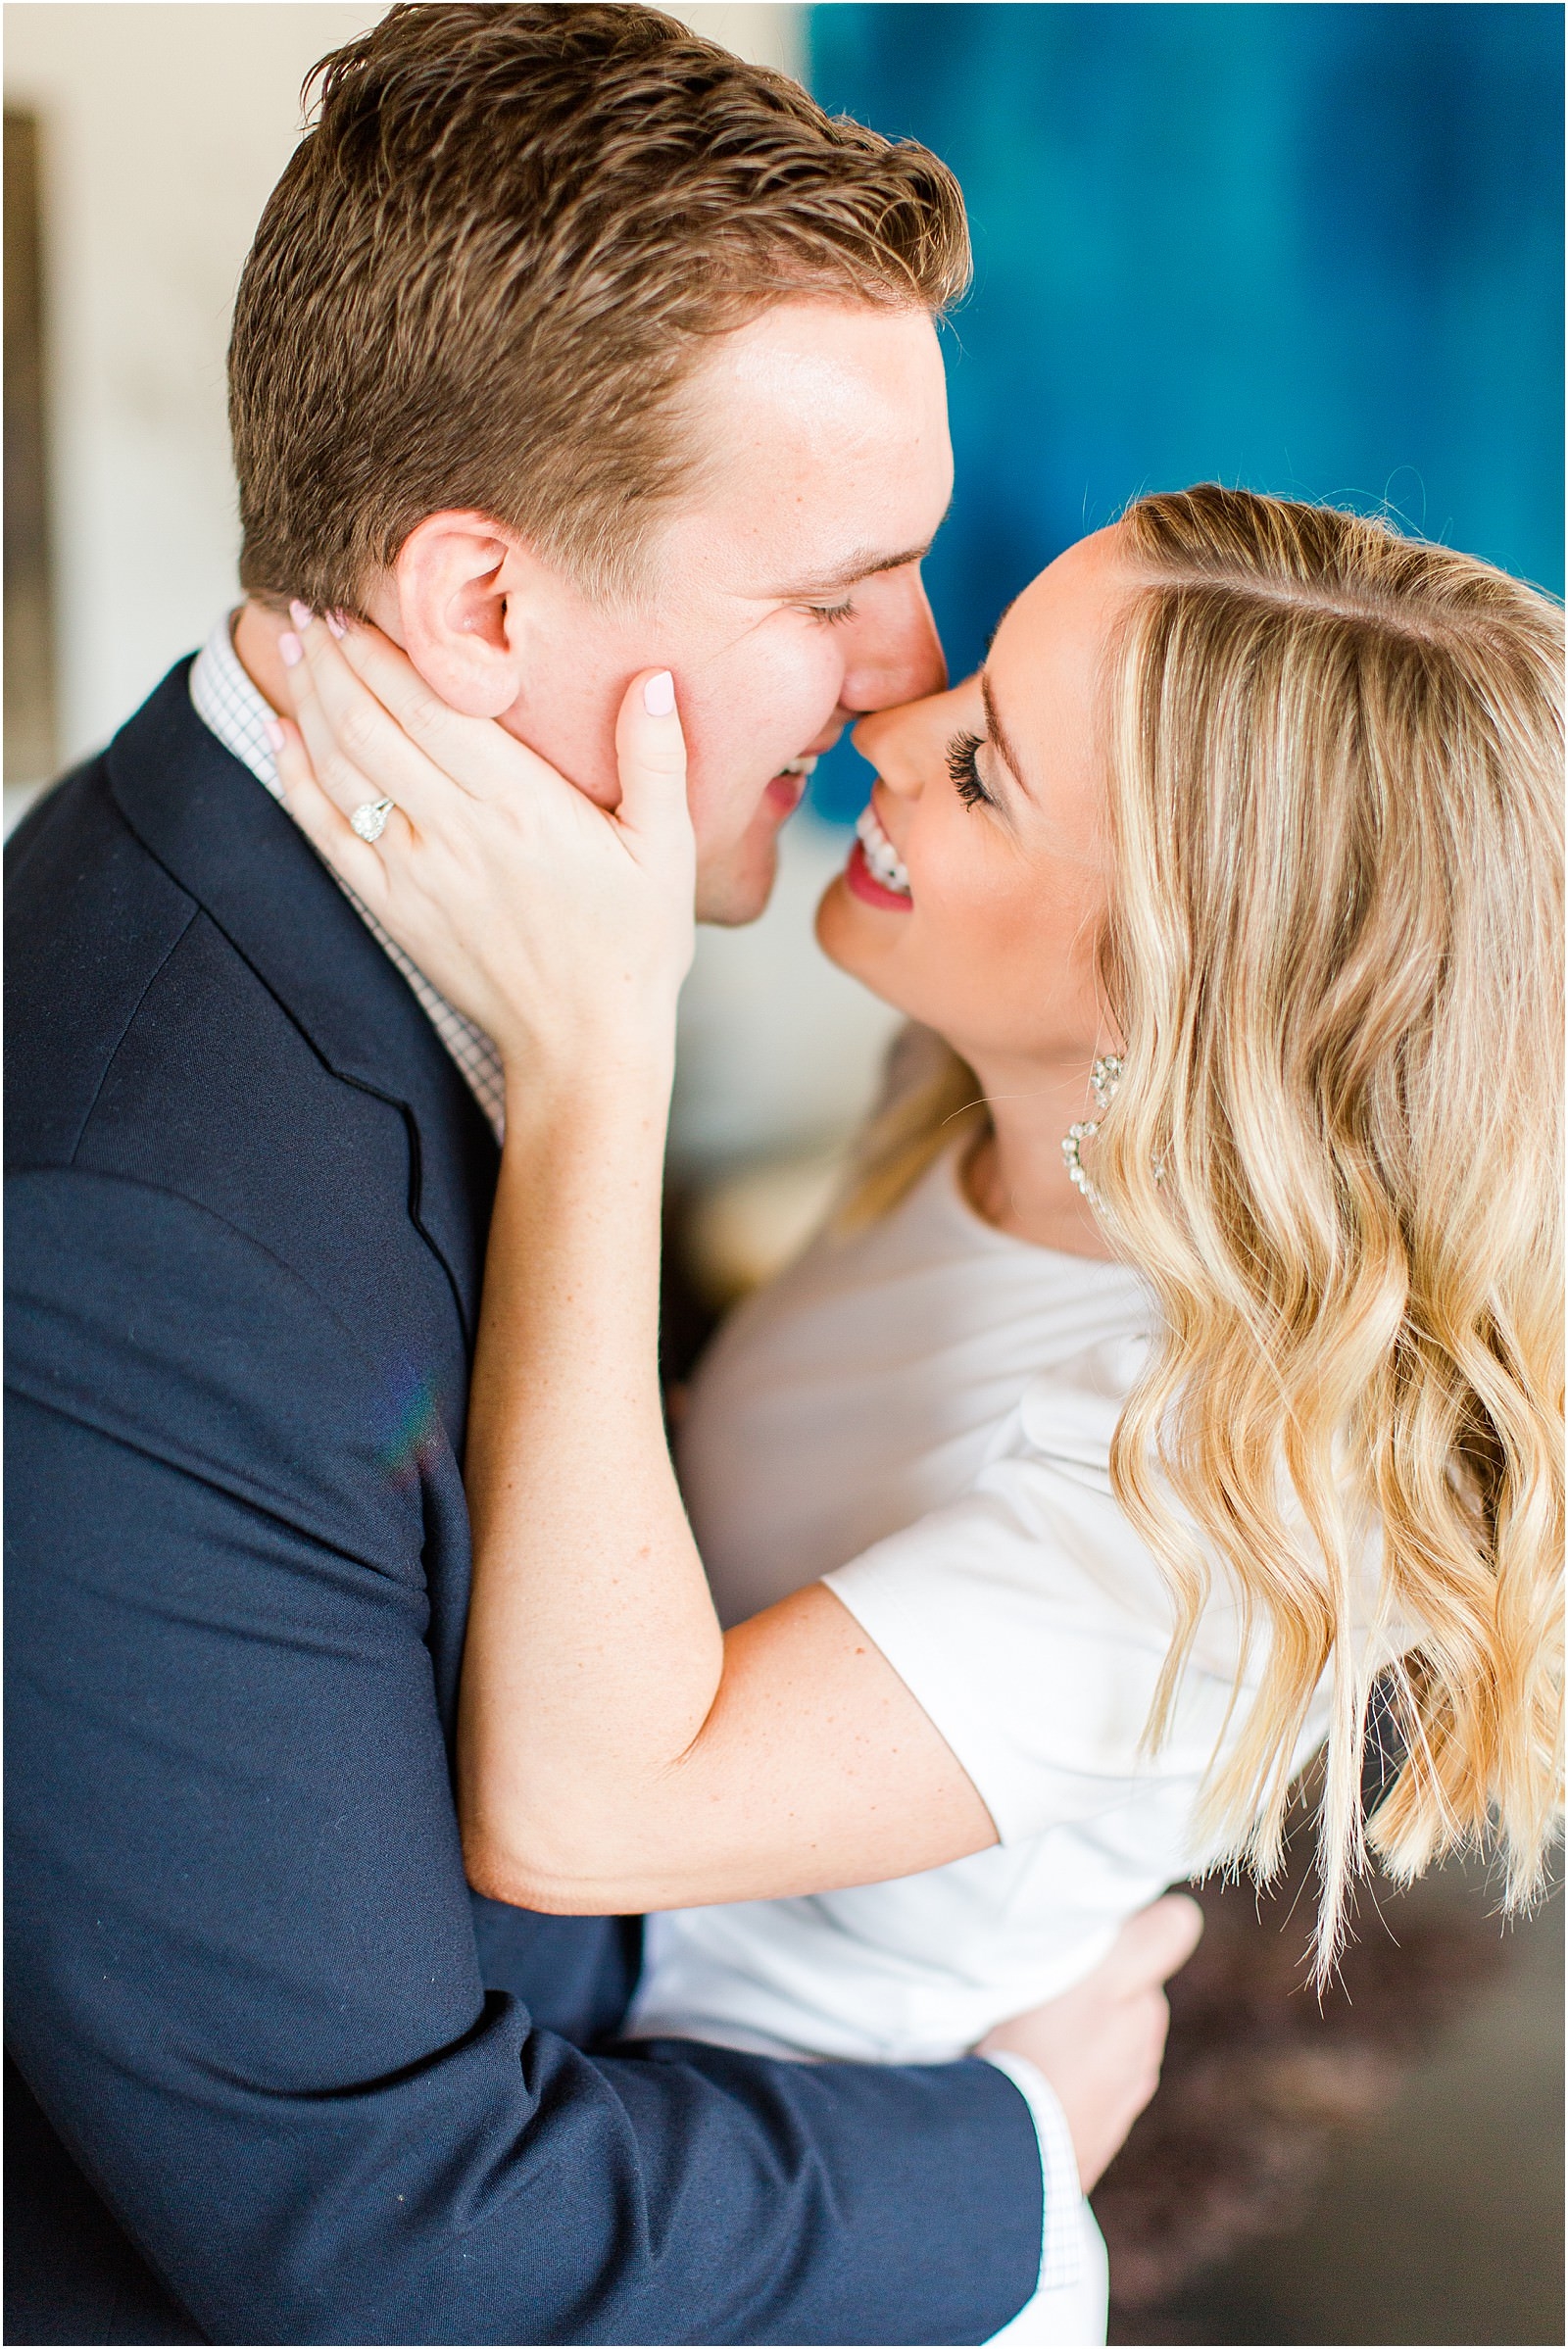 Madison and Christaan | A 20 West Engagement Session in Downto wn Newburgh | Bret and Brandie Photography005.jpg